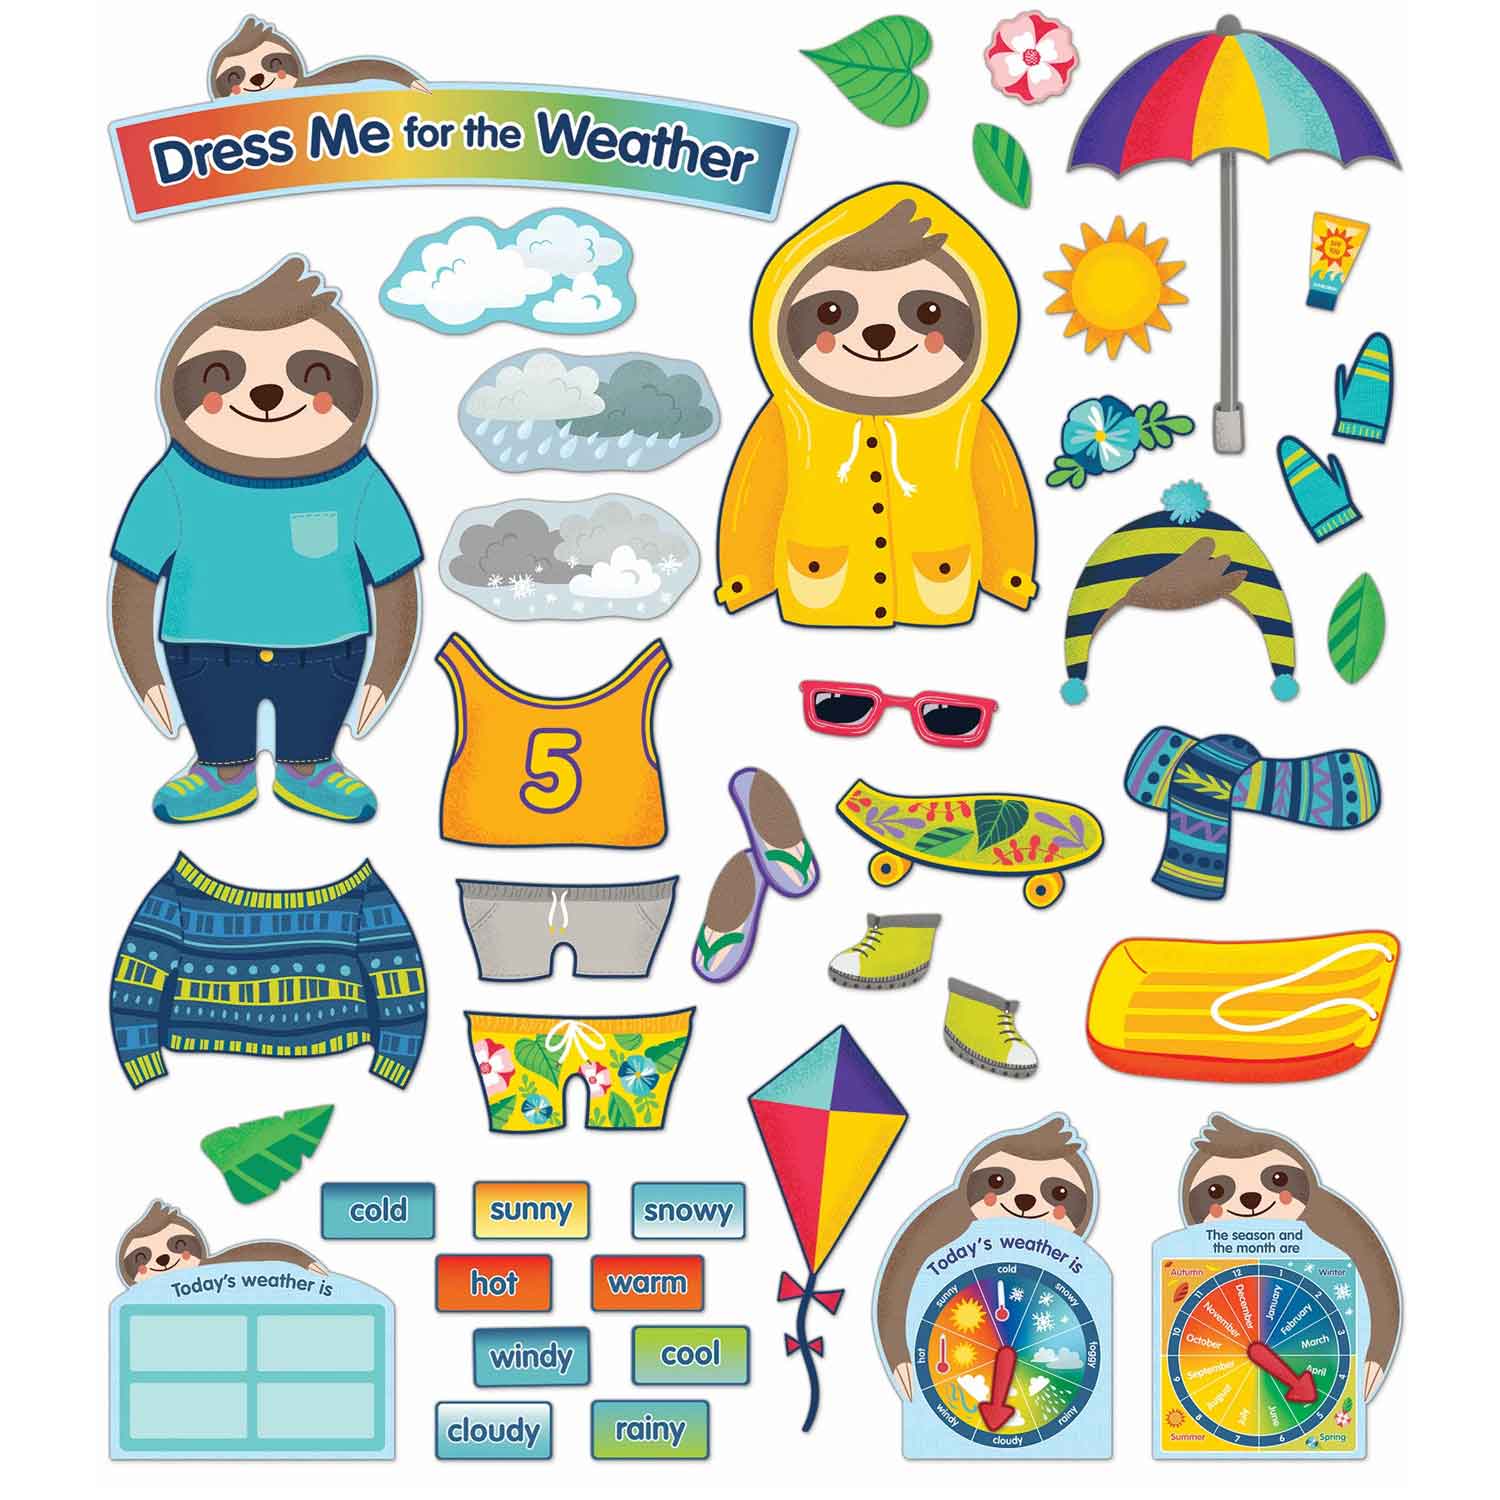 sloth-dress-me-for-the-weather-bulletin-board-set-becker-s